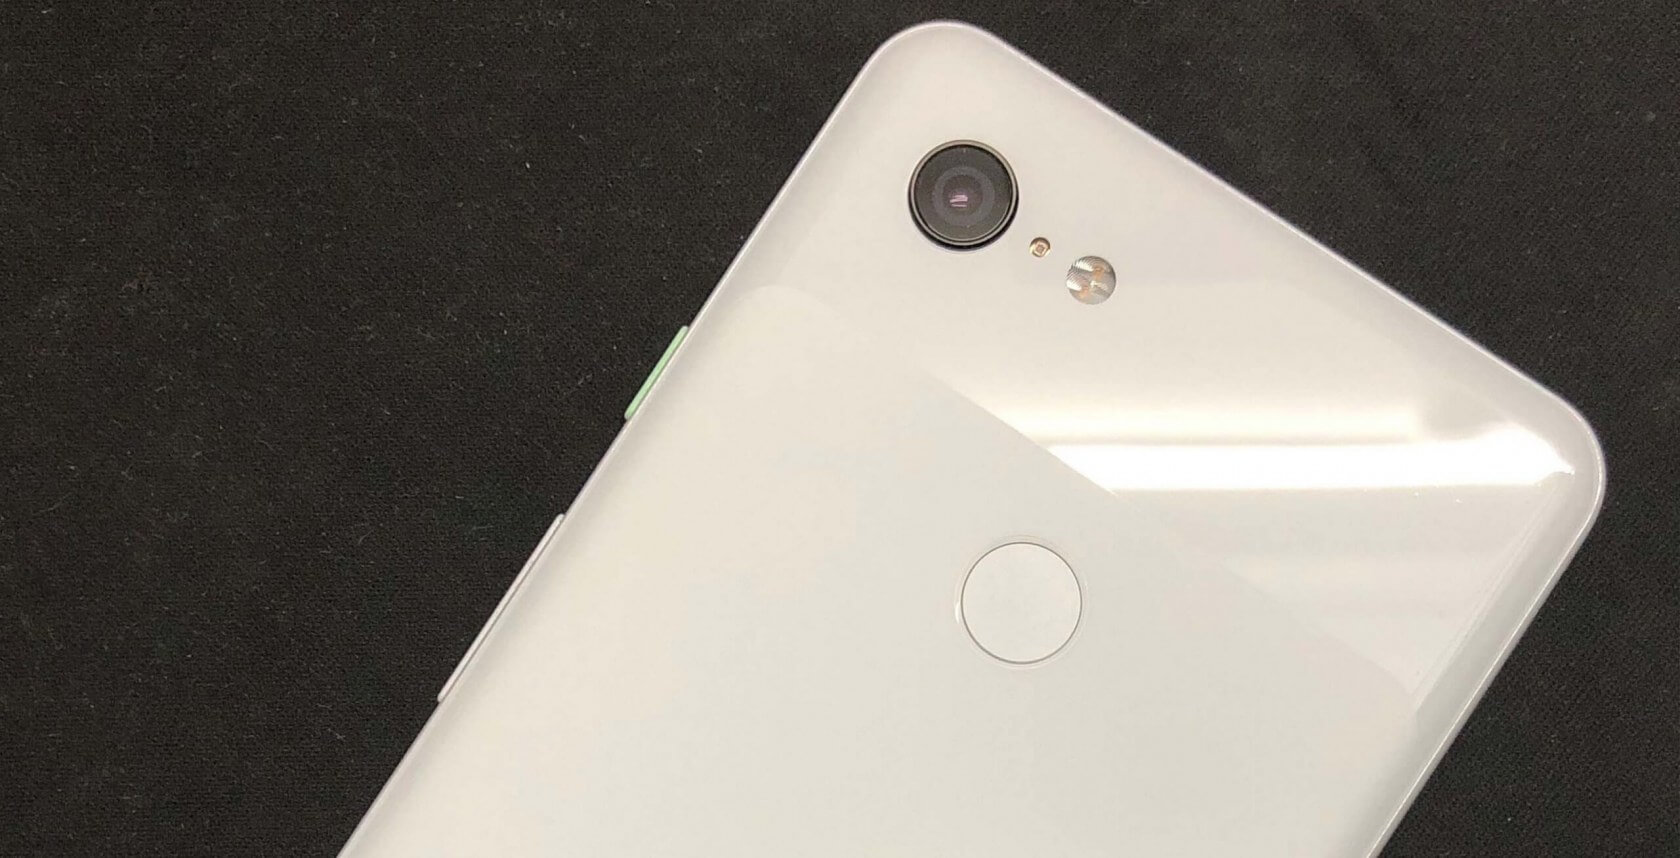 Report says budget Pixel phones will be called the Pixel 3a and Pixel 3a XL